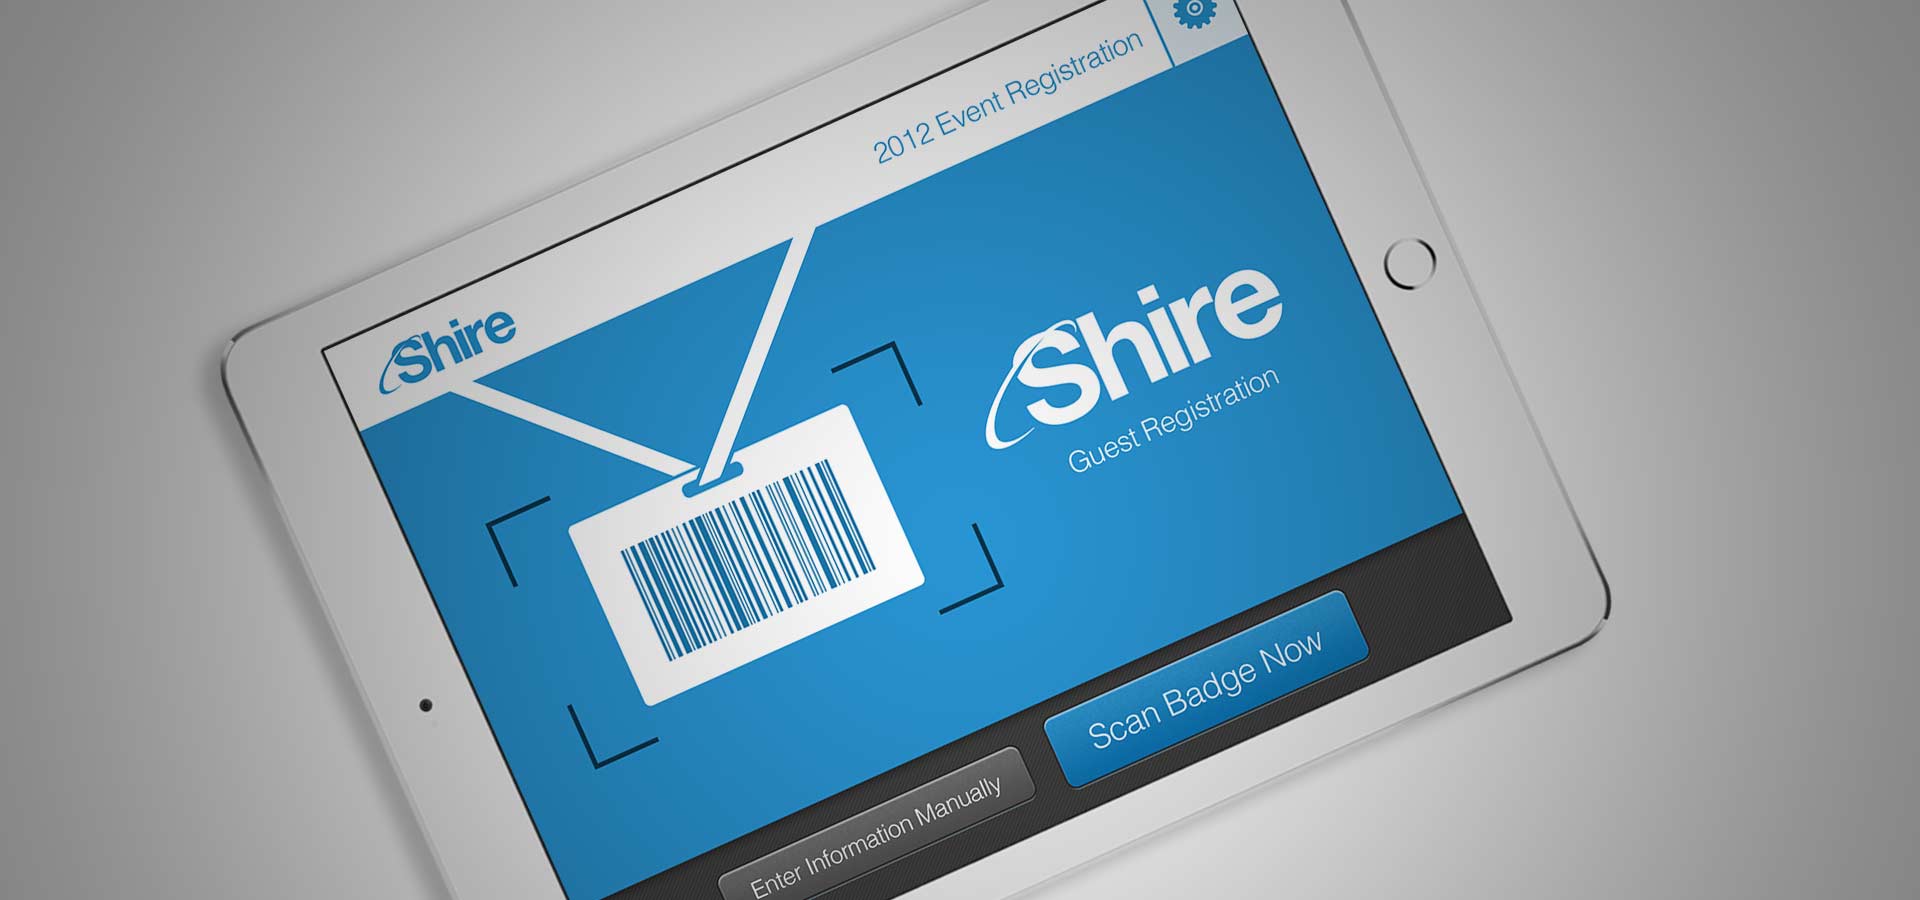 Shire Conference App